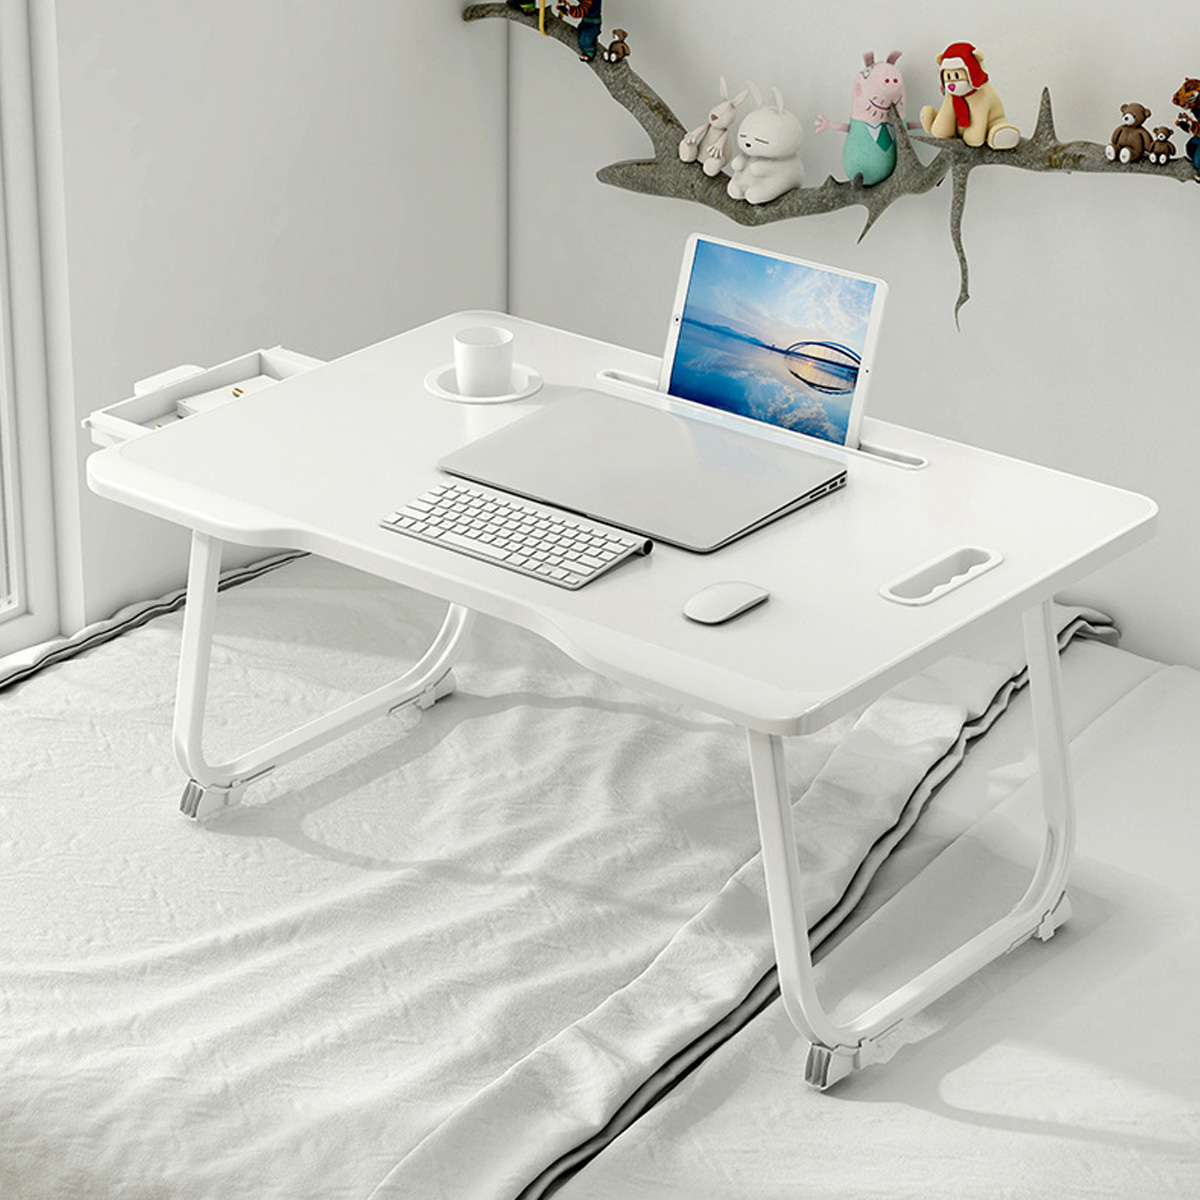 Folding-Laptop-Table-Desk-Notebook-Learning-Writing-Desk-with-Small-Drawer-Cup-Slot-Lap-Desk-Bed-for-1761880-9